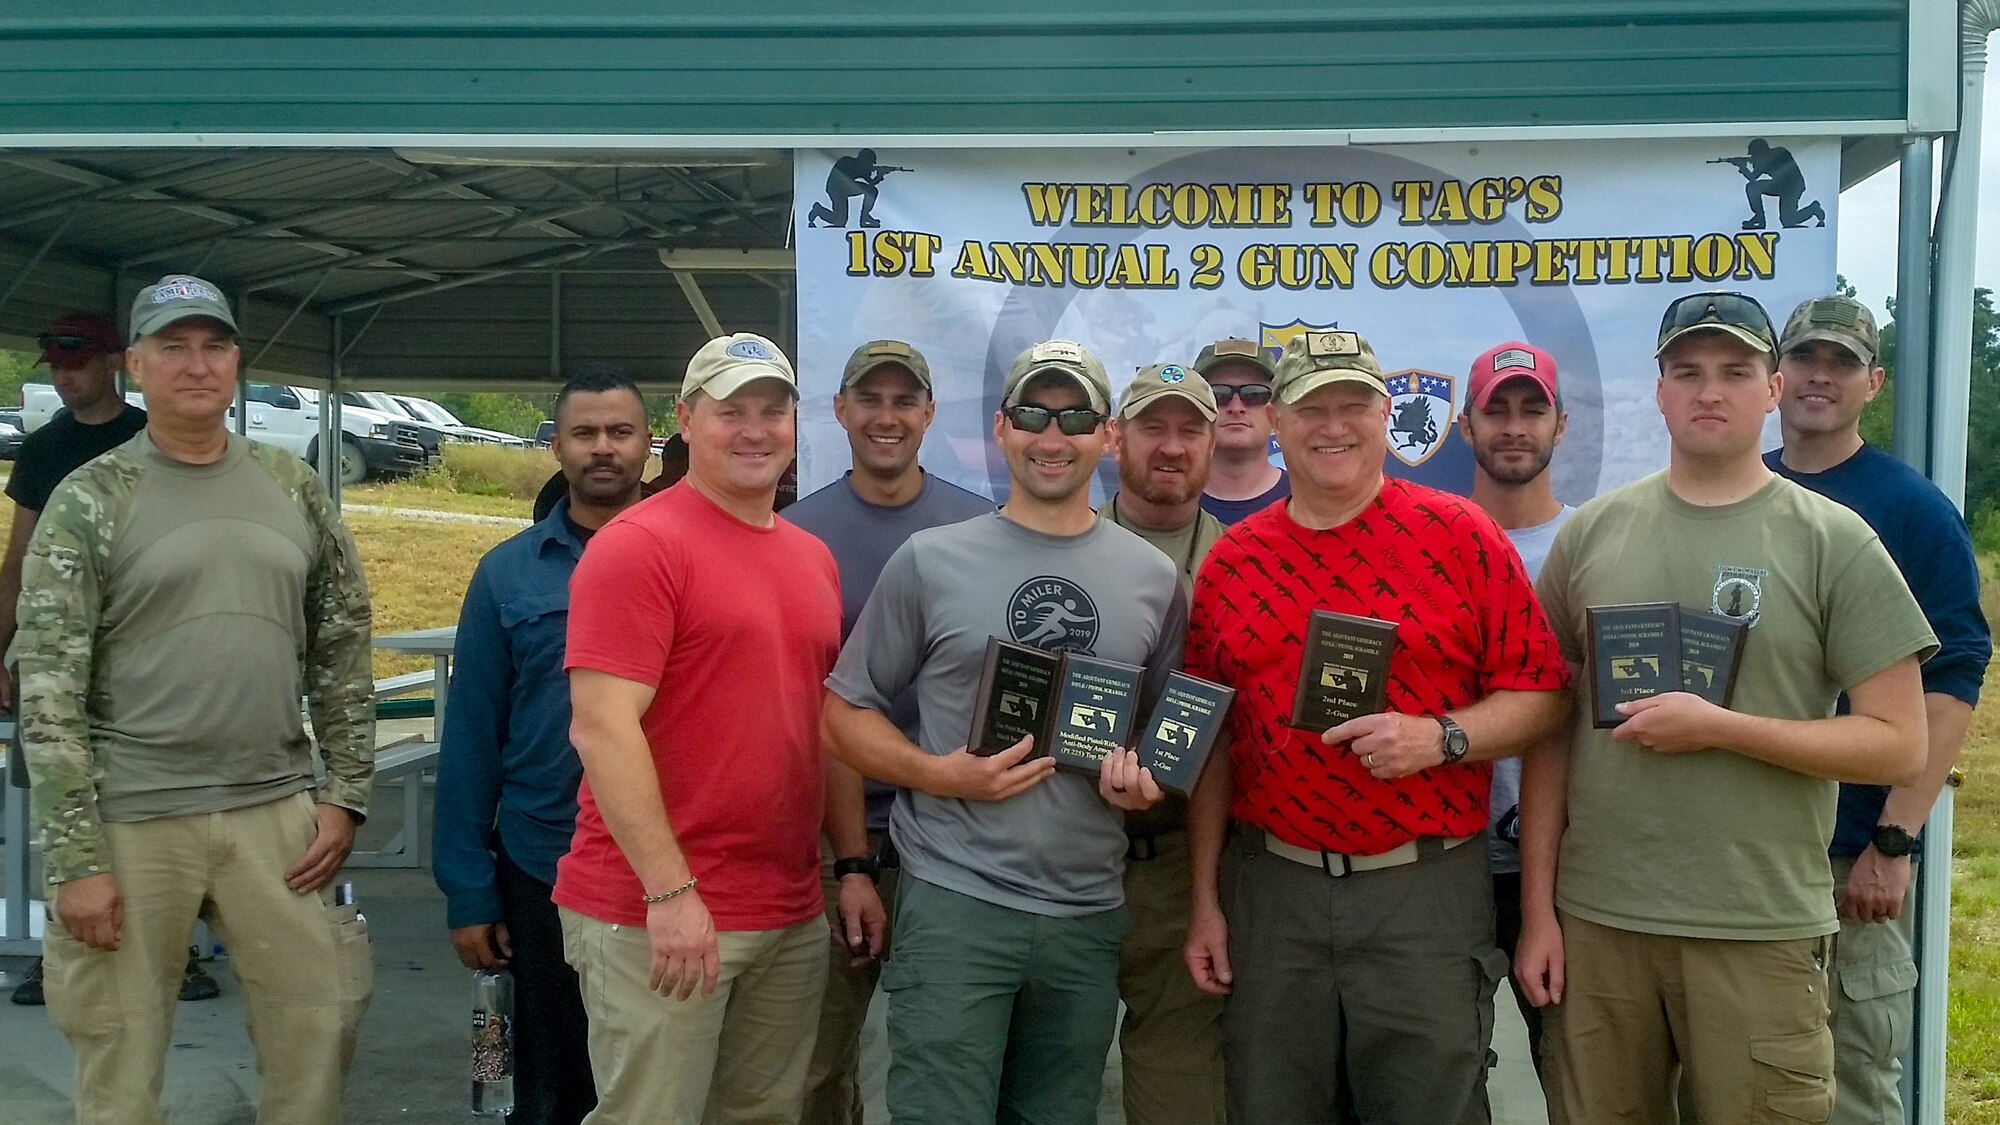 Current and retired members of the Kentucky Air National Guard competed at the Adjutant General’s Two-Gun Pistol and Rifle Scramble match at the Wendell H. Ford Regional Training Center Sept. 26, 2019. Back row from left to right: John Siebert, Miah Helm, Eric Skaggs, Frank Tallman (retired), Jacob Faith, Yuri Motamedi and Frank Morgan. Front row from left to right: Kevin Krauss, David Farc, Darryl Loafman and Austin Goldman. Farc took Two-Gun Top Gun, followed by Loafman and Goldman. (Courtesy Photo)